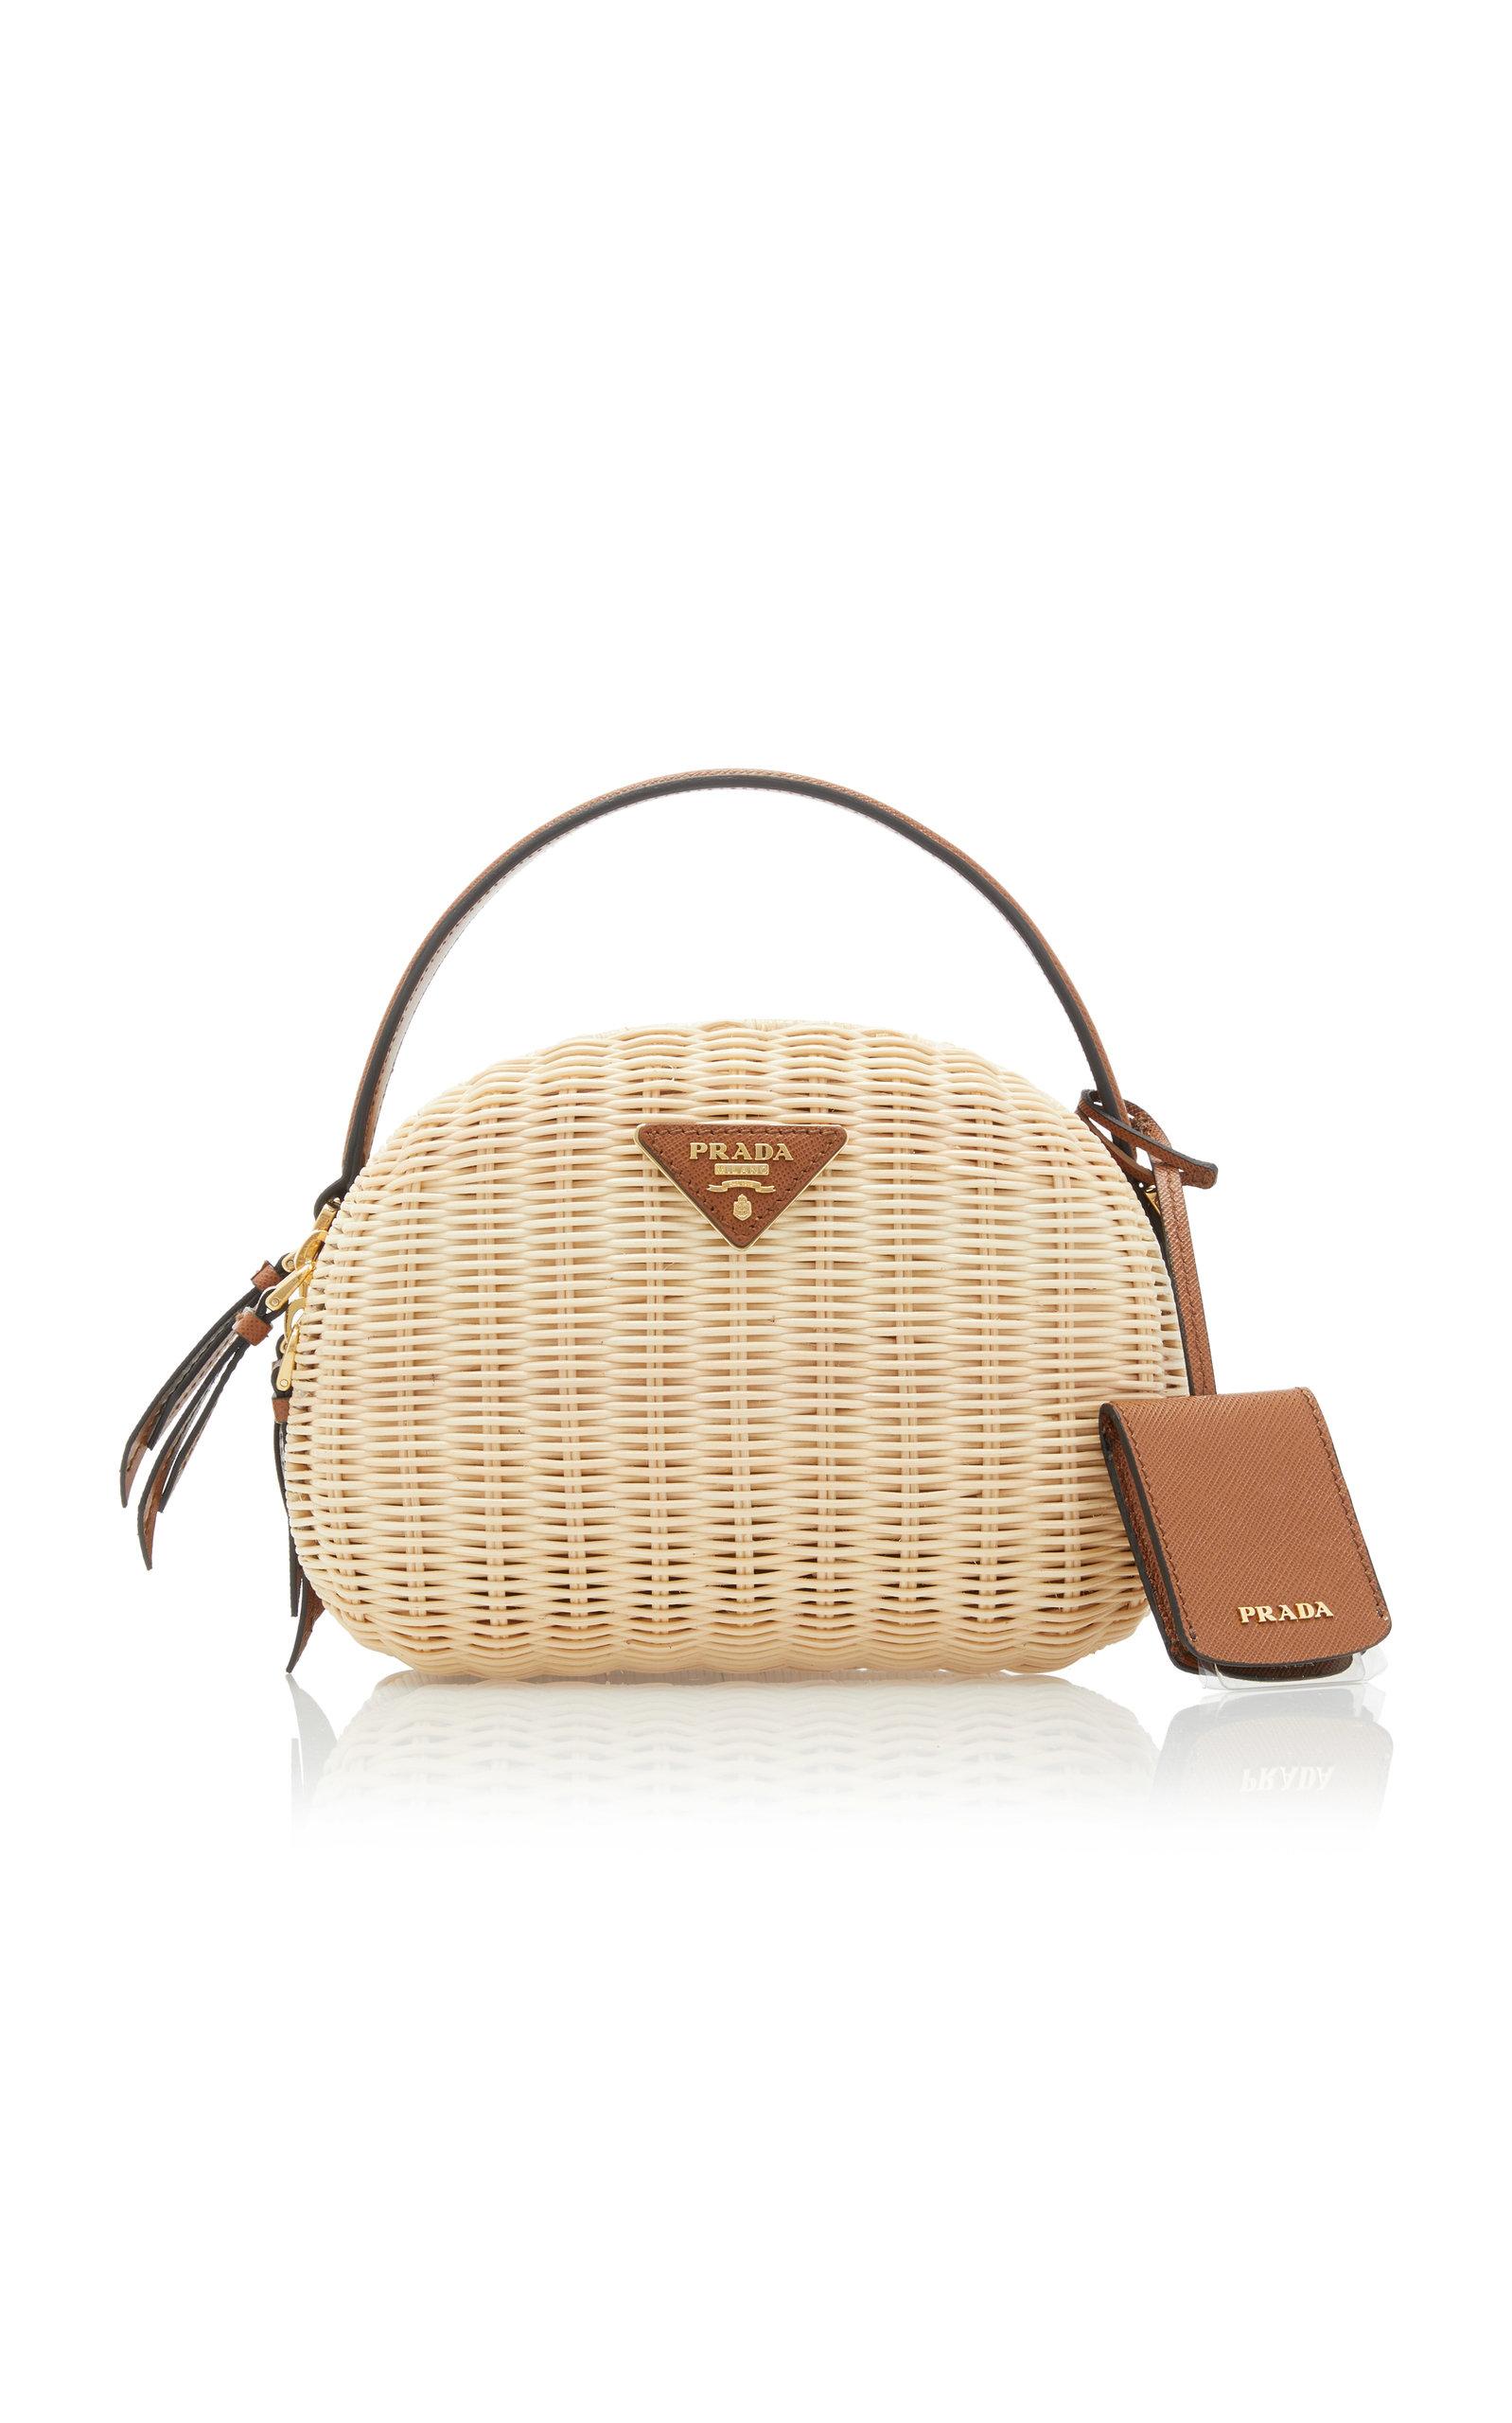 Prada Wicker And Saffiano Leather Shoulder Bag in Natural